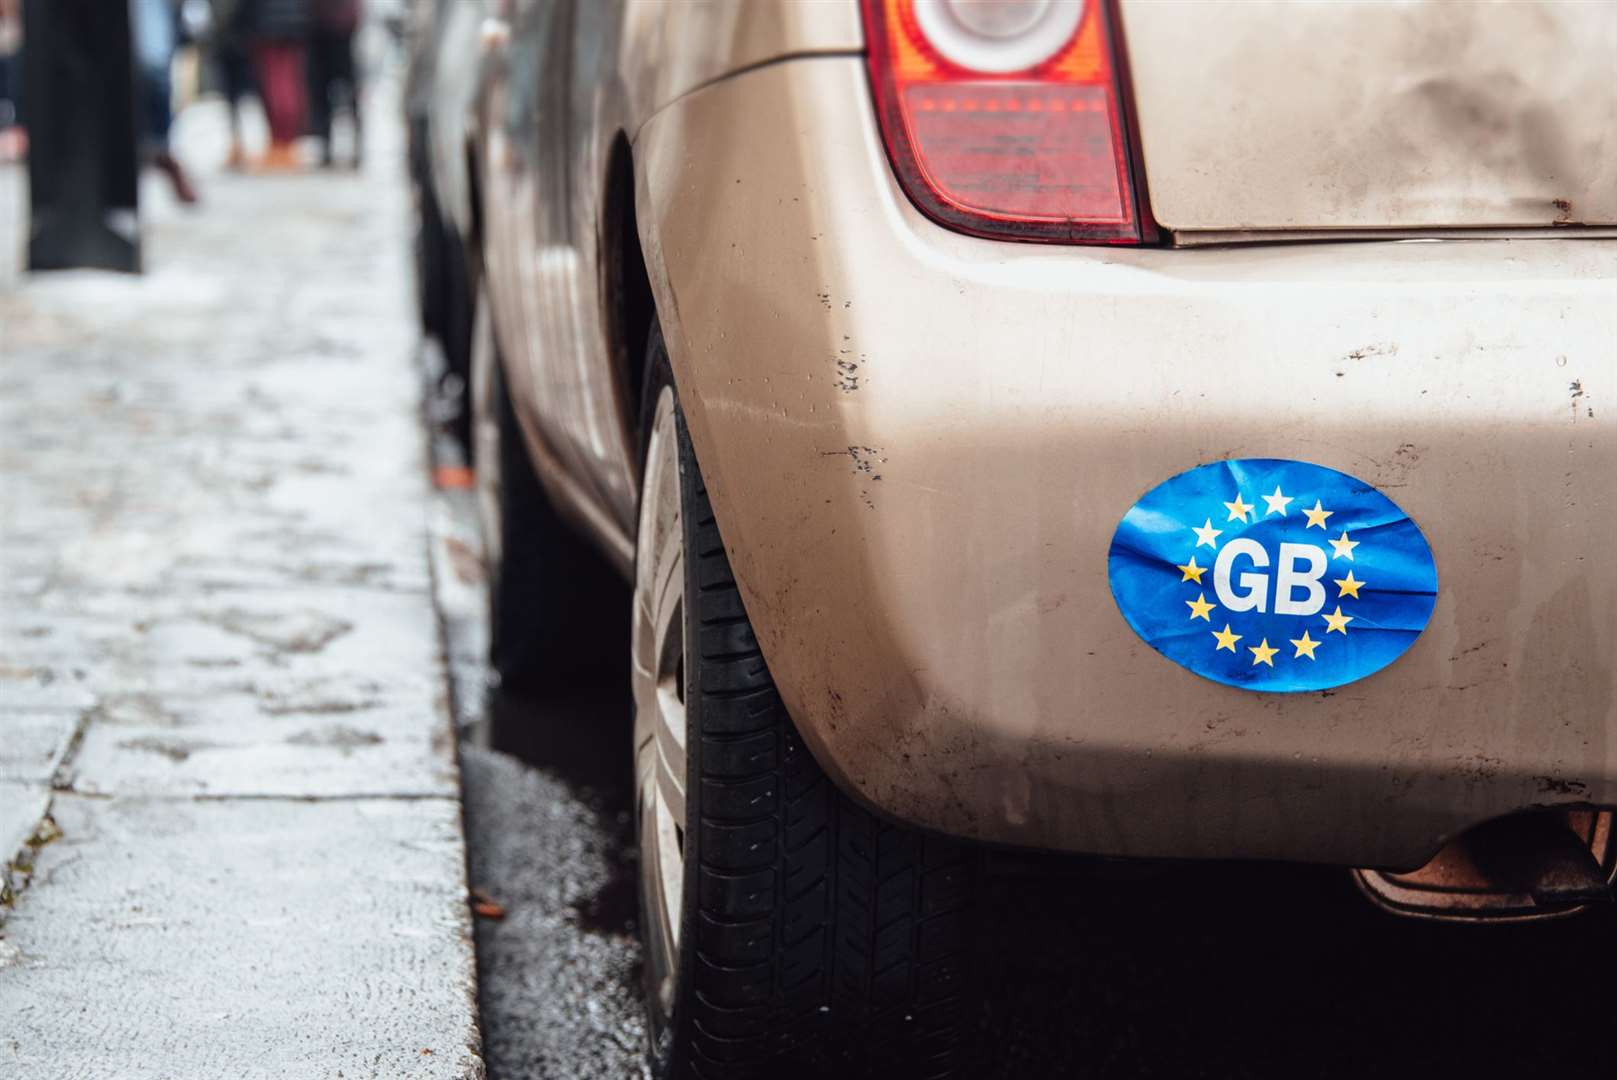 The old style GB car sticker cannot be used anymore